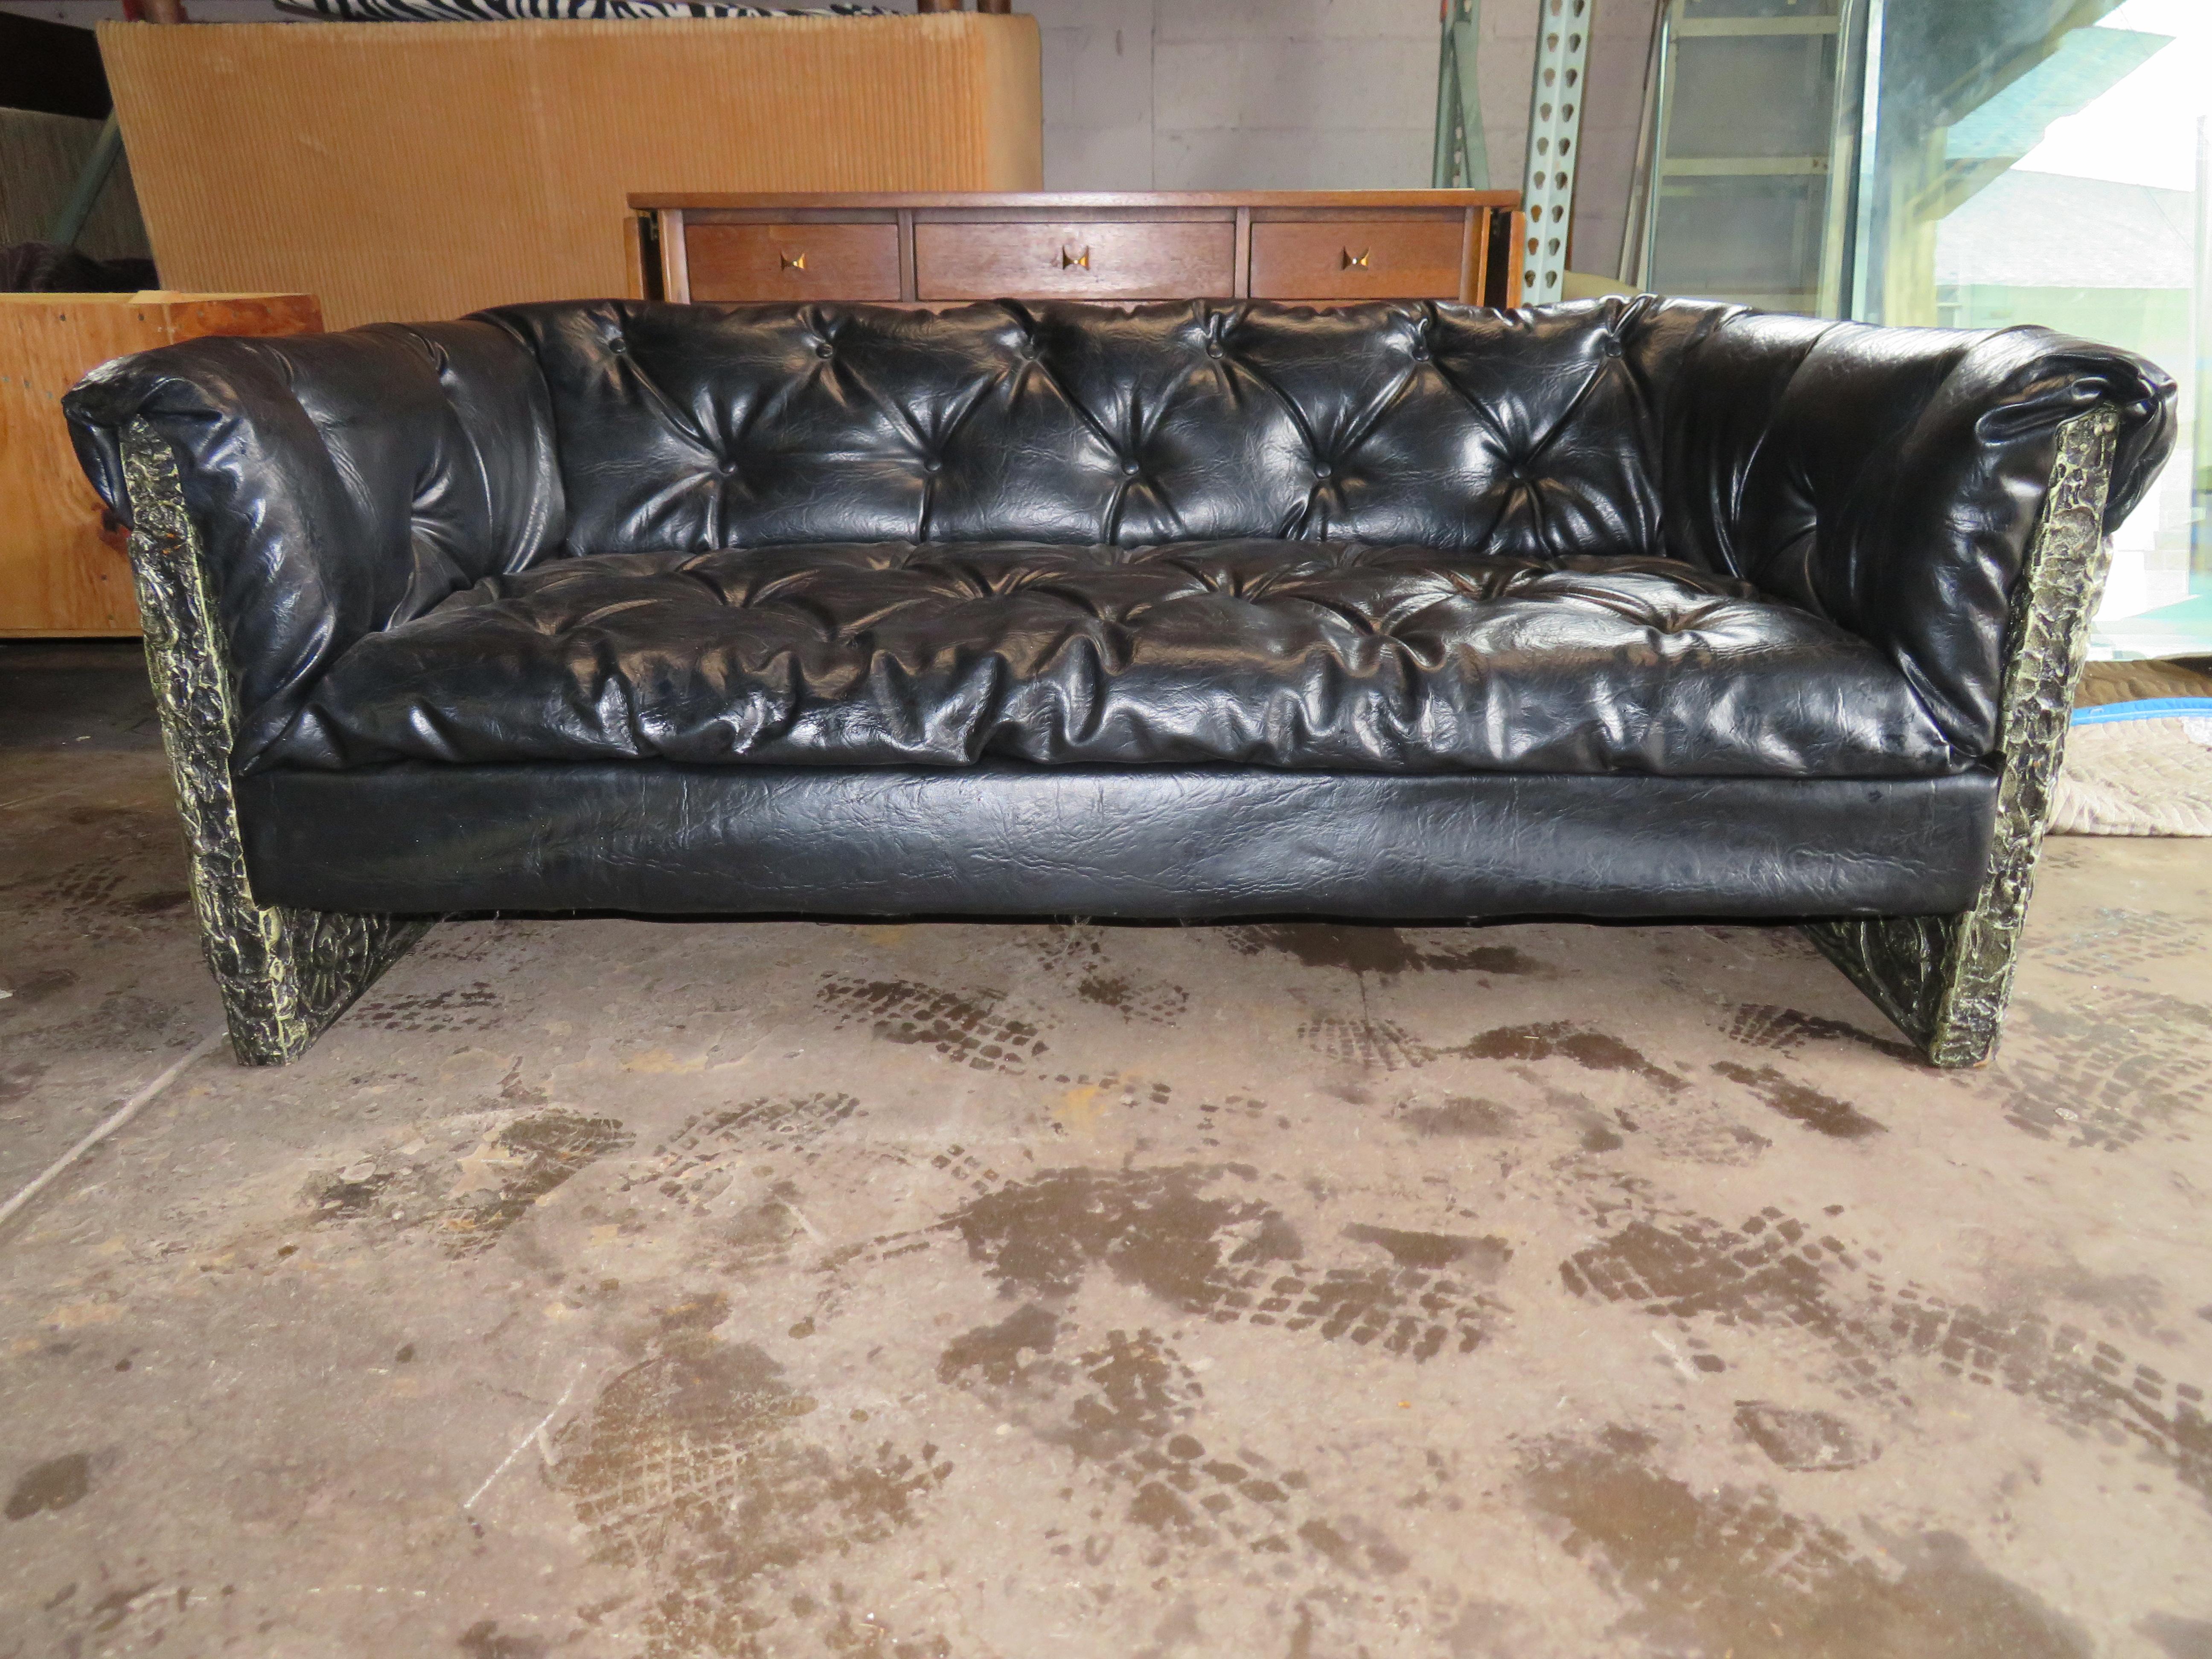 Rare Adrian Pearsall Brutalist tufted Chesterfield love seat sofa. These unusual pieces are getting more and more hard to find, designers are buying them up and doing complete rooms in this Brutalist style. The original faux leather is worn and